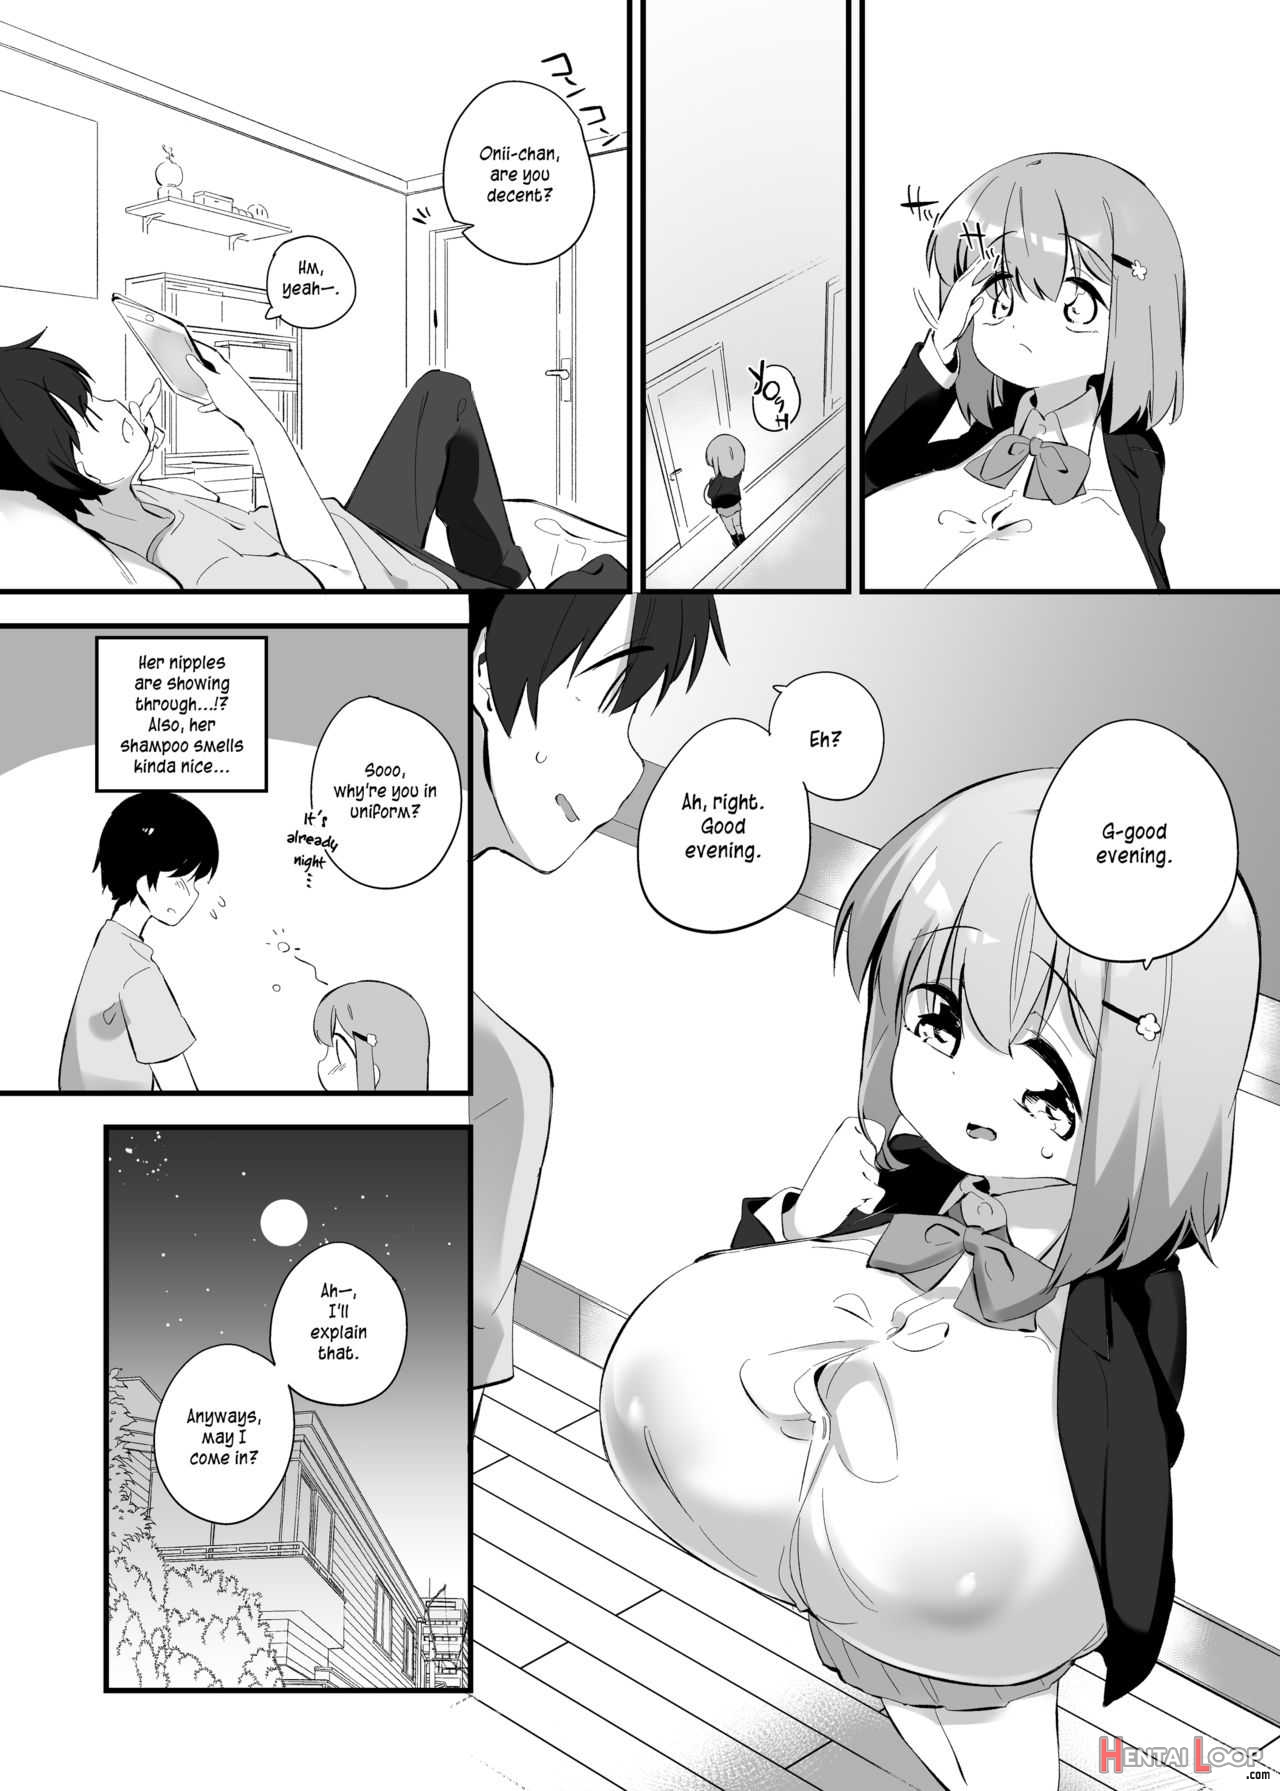 Between Sisters, Are You Happy? 2 page 3